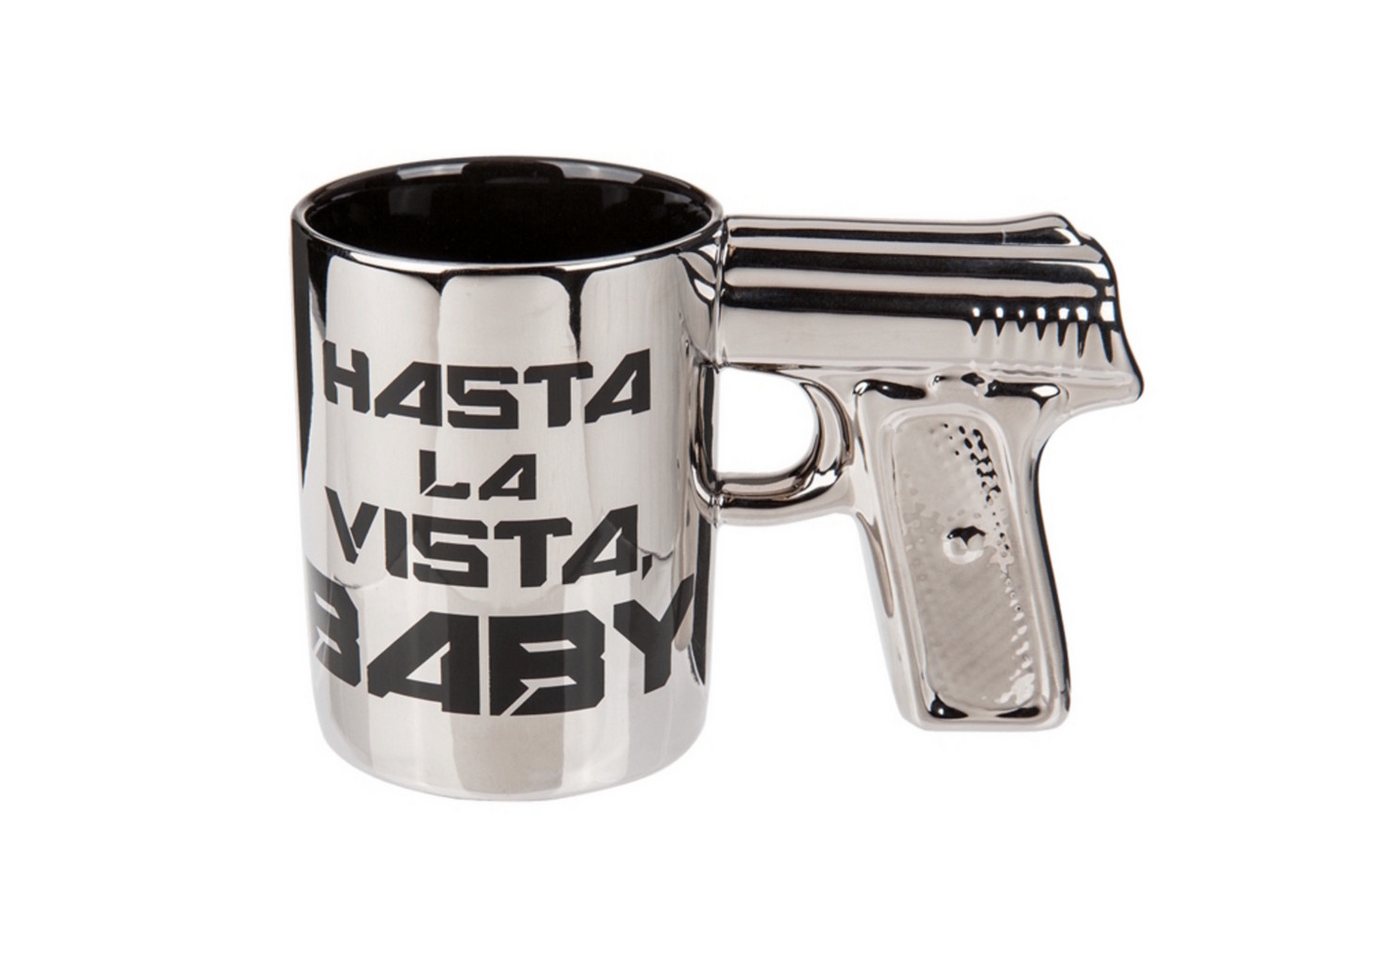 Out of the Blue Tasse Pistolengriff Kaffeebecher mit Spruch in silber von Out of the Blue